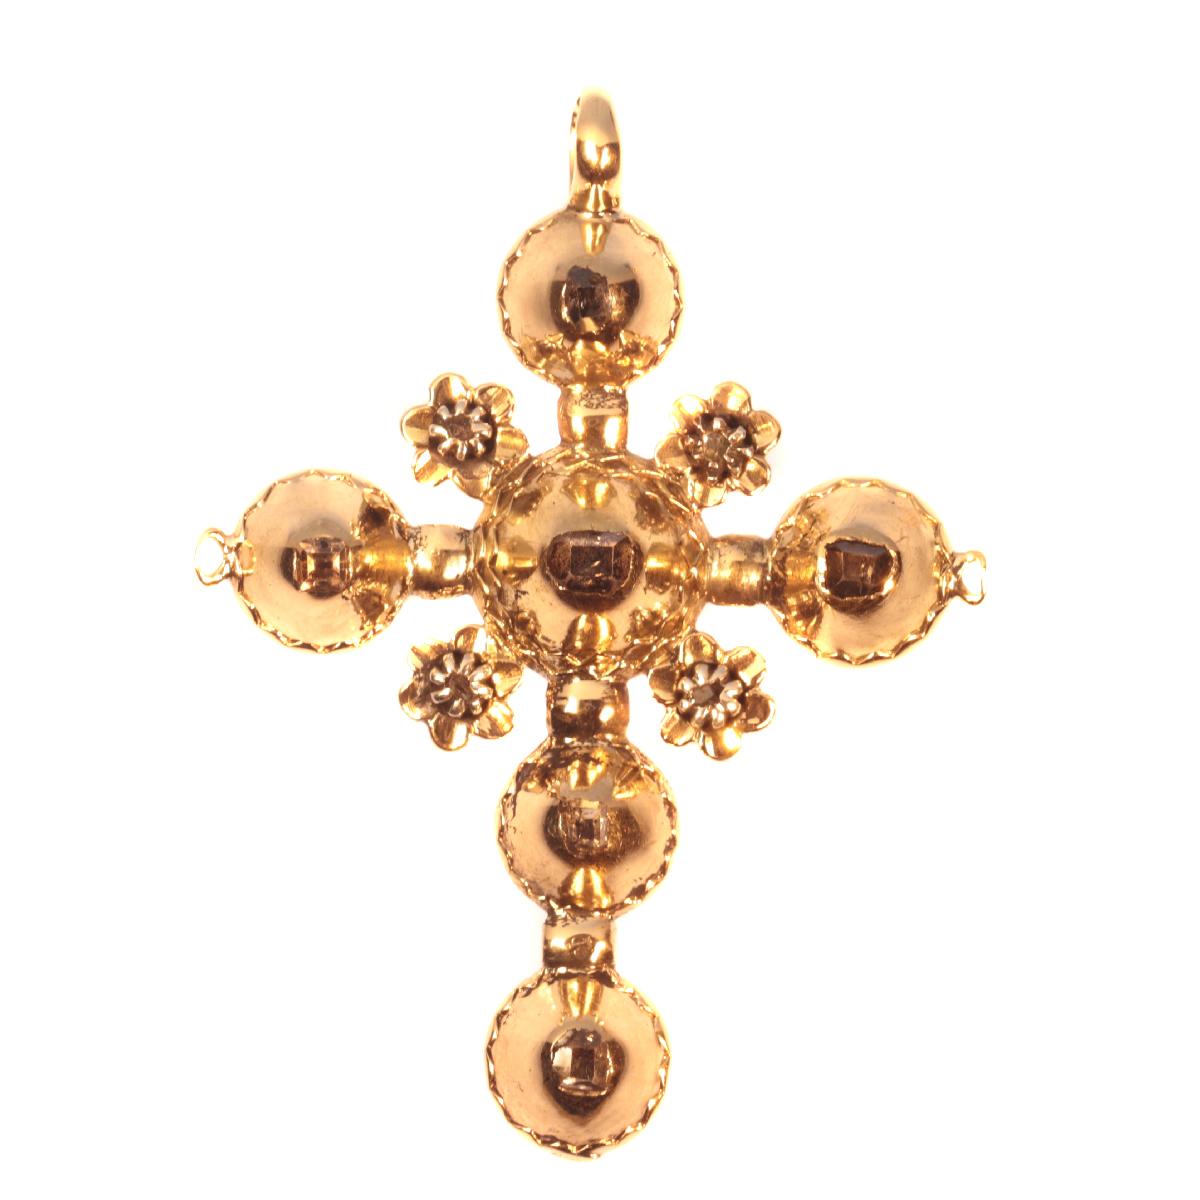 Antique jewelry object group: cross pendant (is being sold without pictured chain)

Condition: very good condition

Do you wish for a 360° view of this unique jewel?
Just send us your request and we’ll give you the direct link to the videoclip